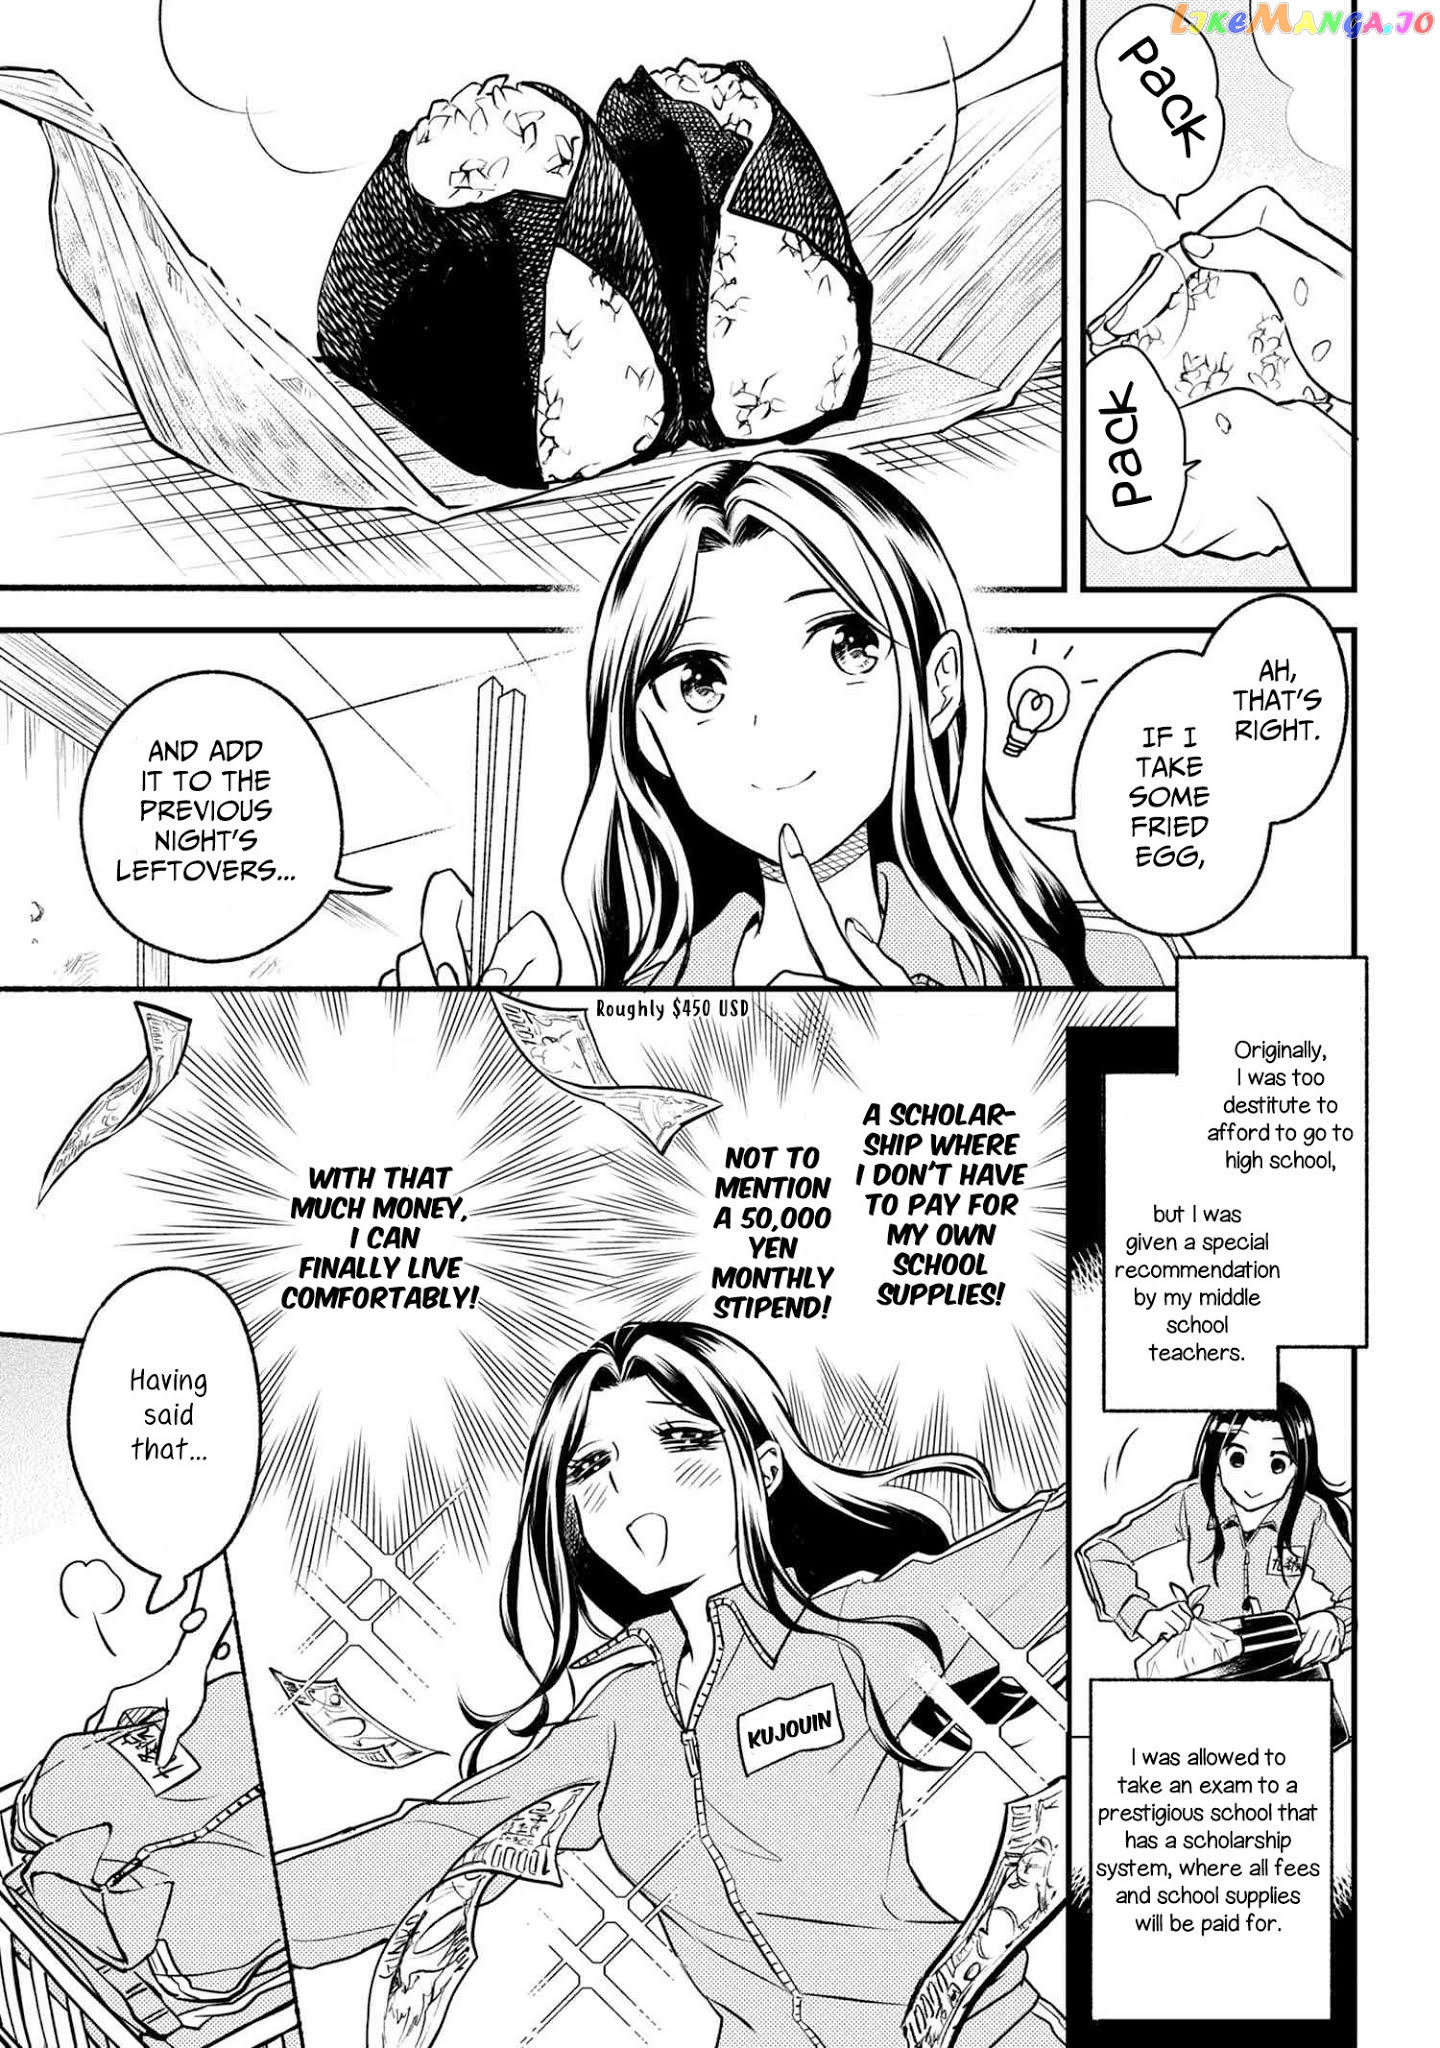 Reiko's Style: Despite Being Mistaken For A Rich Villainess, She's Actually Just Penniless chapter 1 - page 5